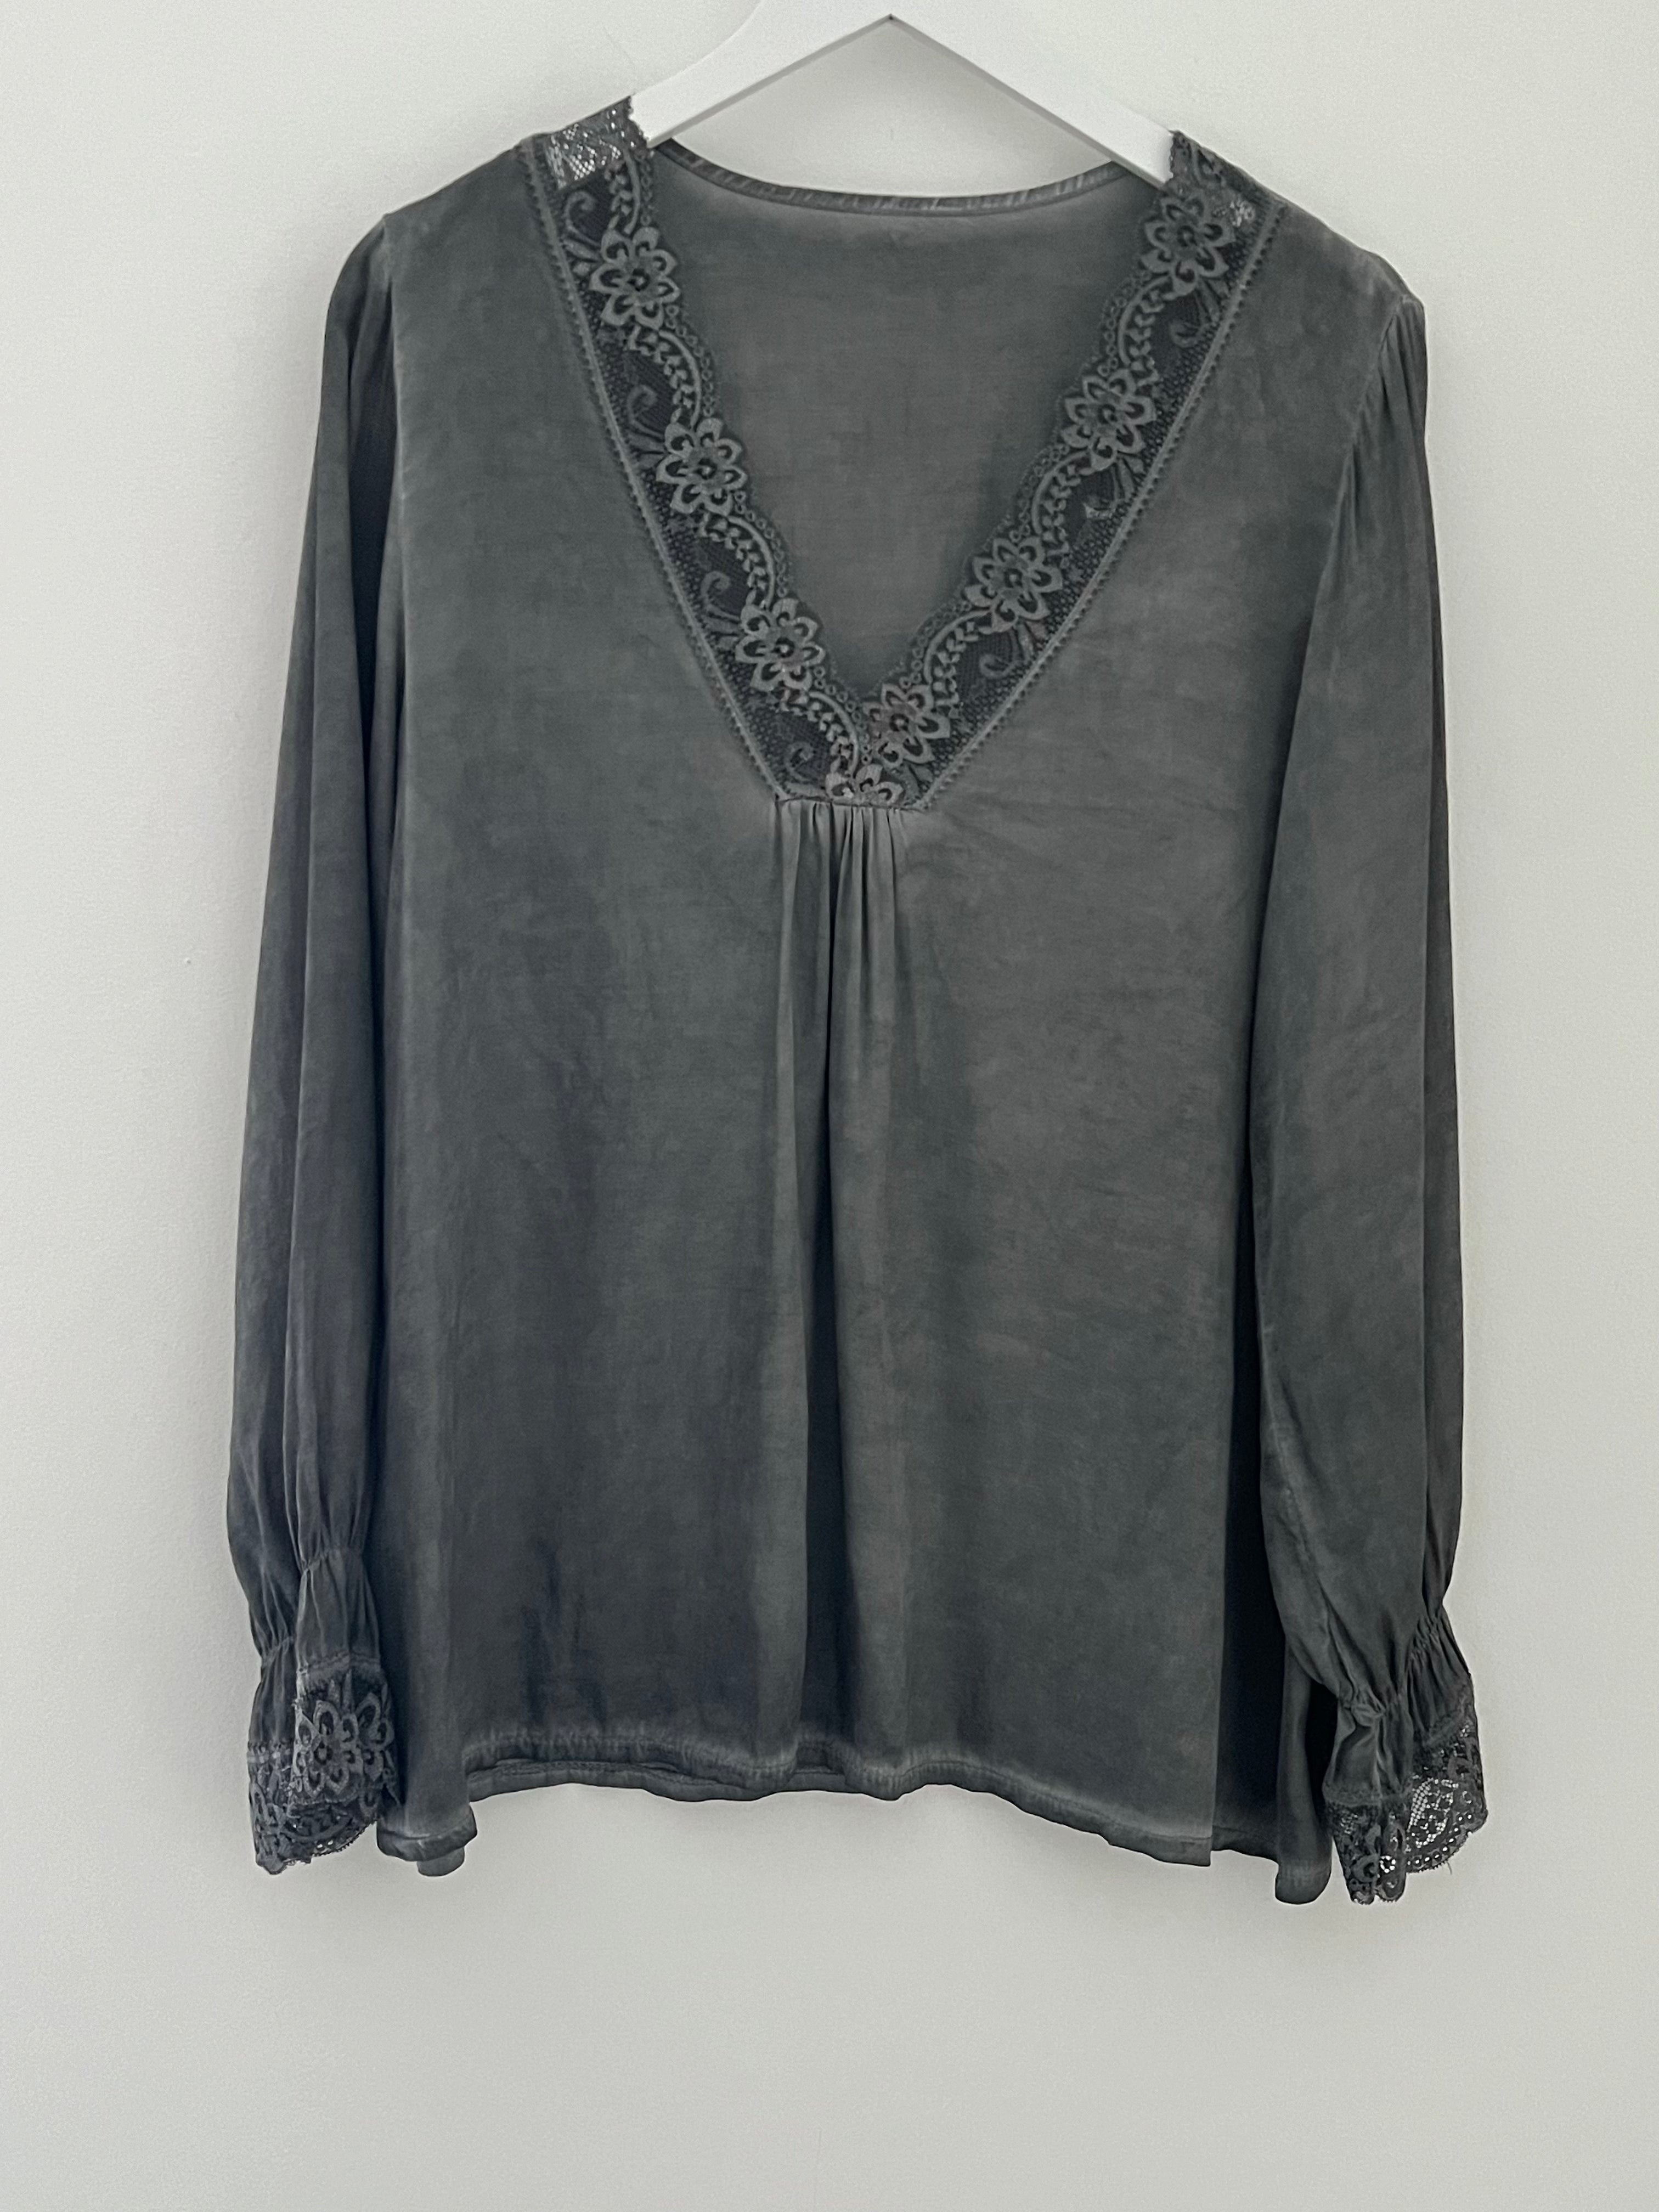 Silky Top with Lace Trim in Vintage Charcoal